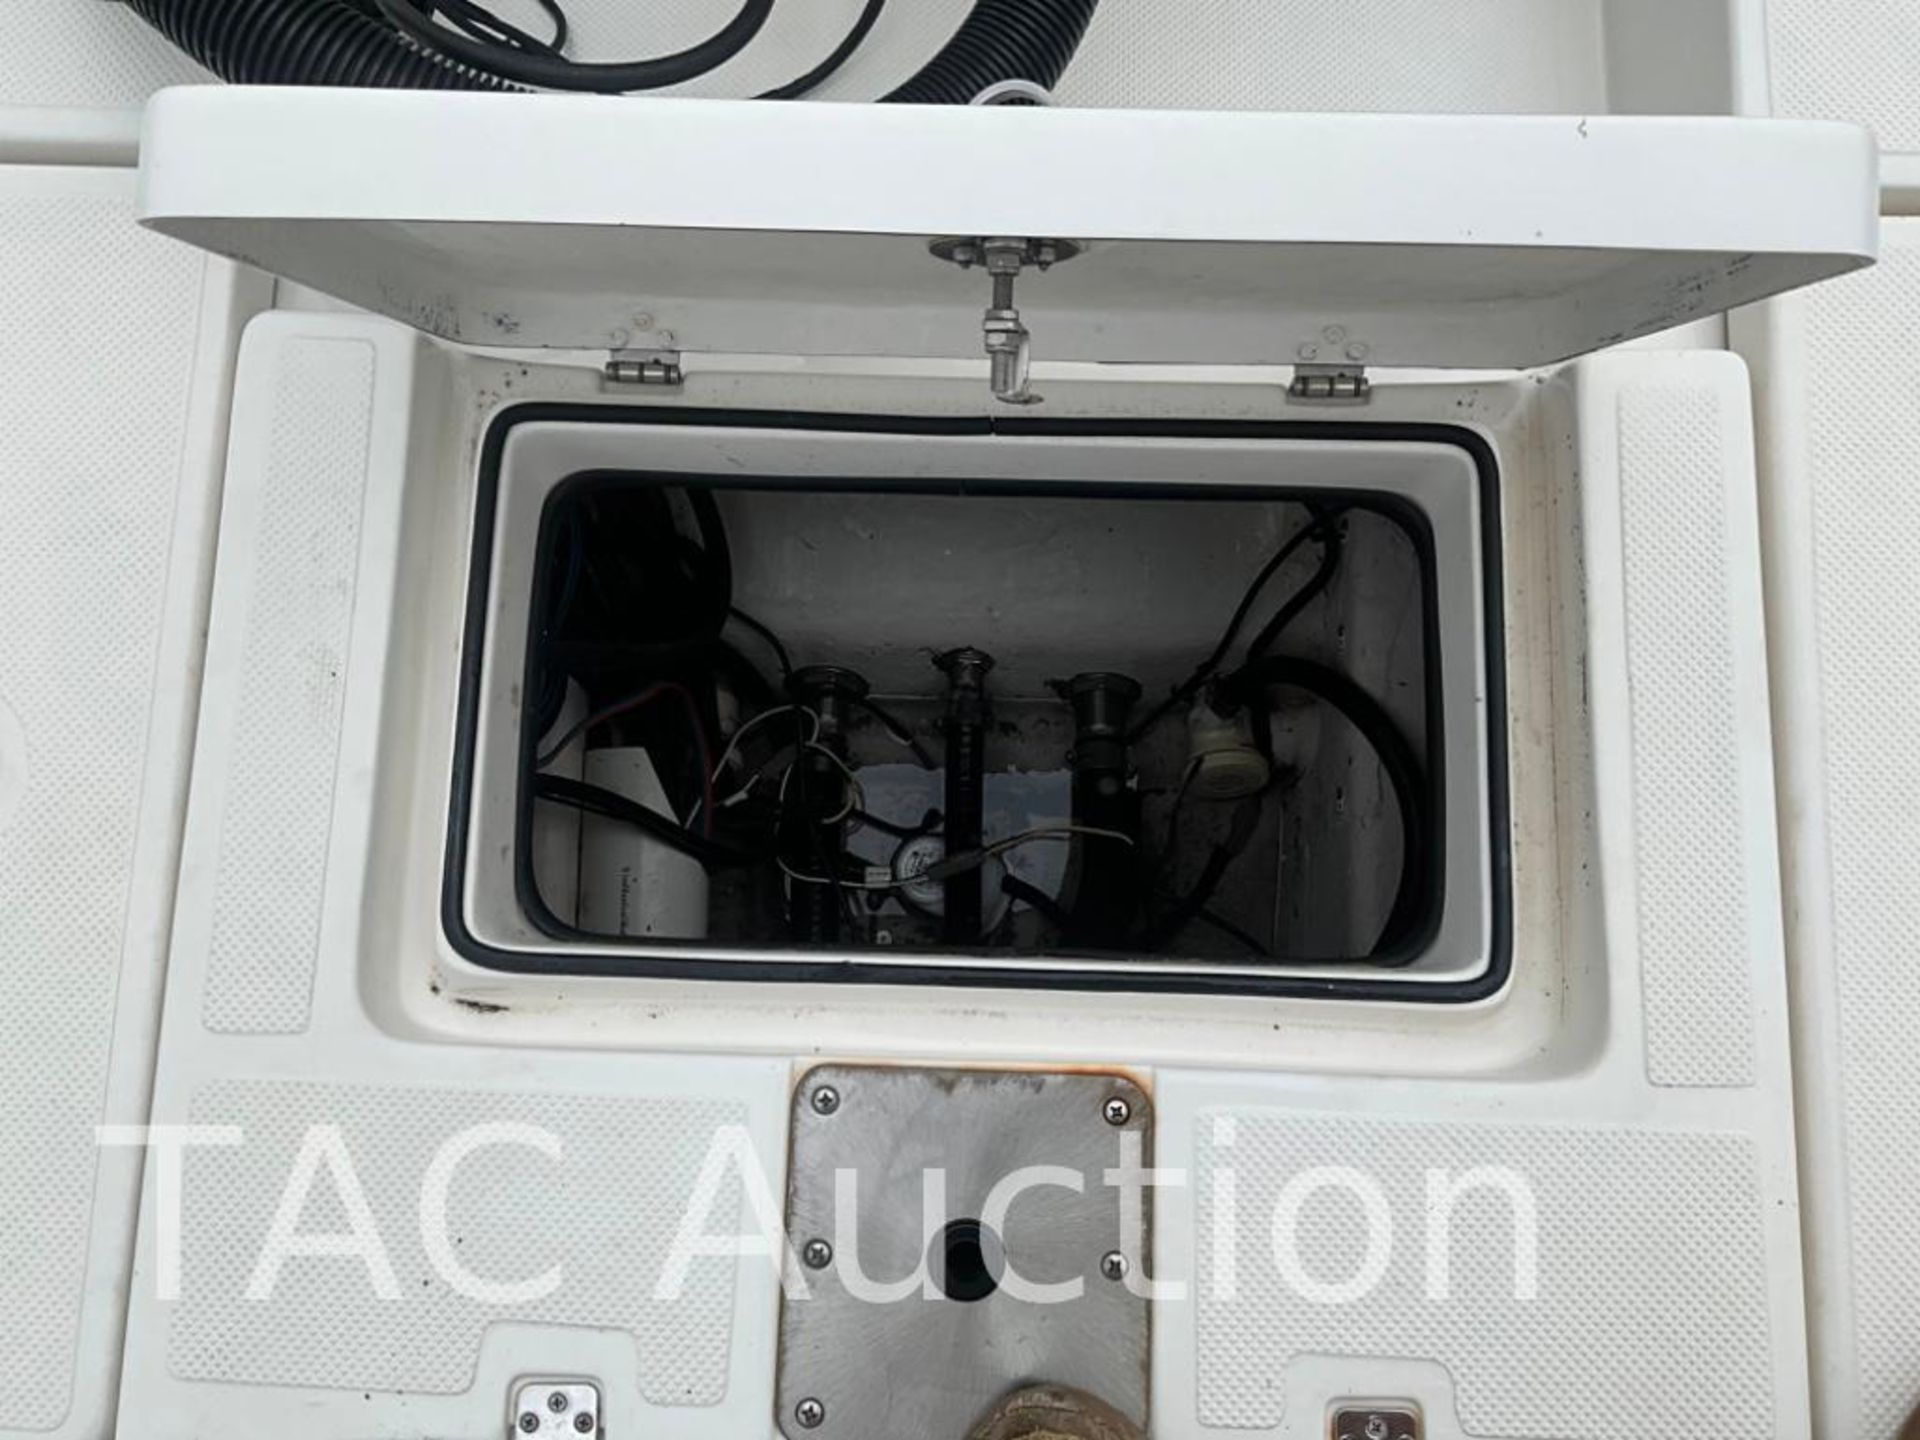 2019 Epic 24ft Bay Center Console - Image 37 of 48